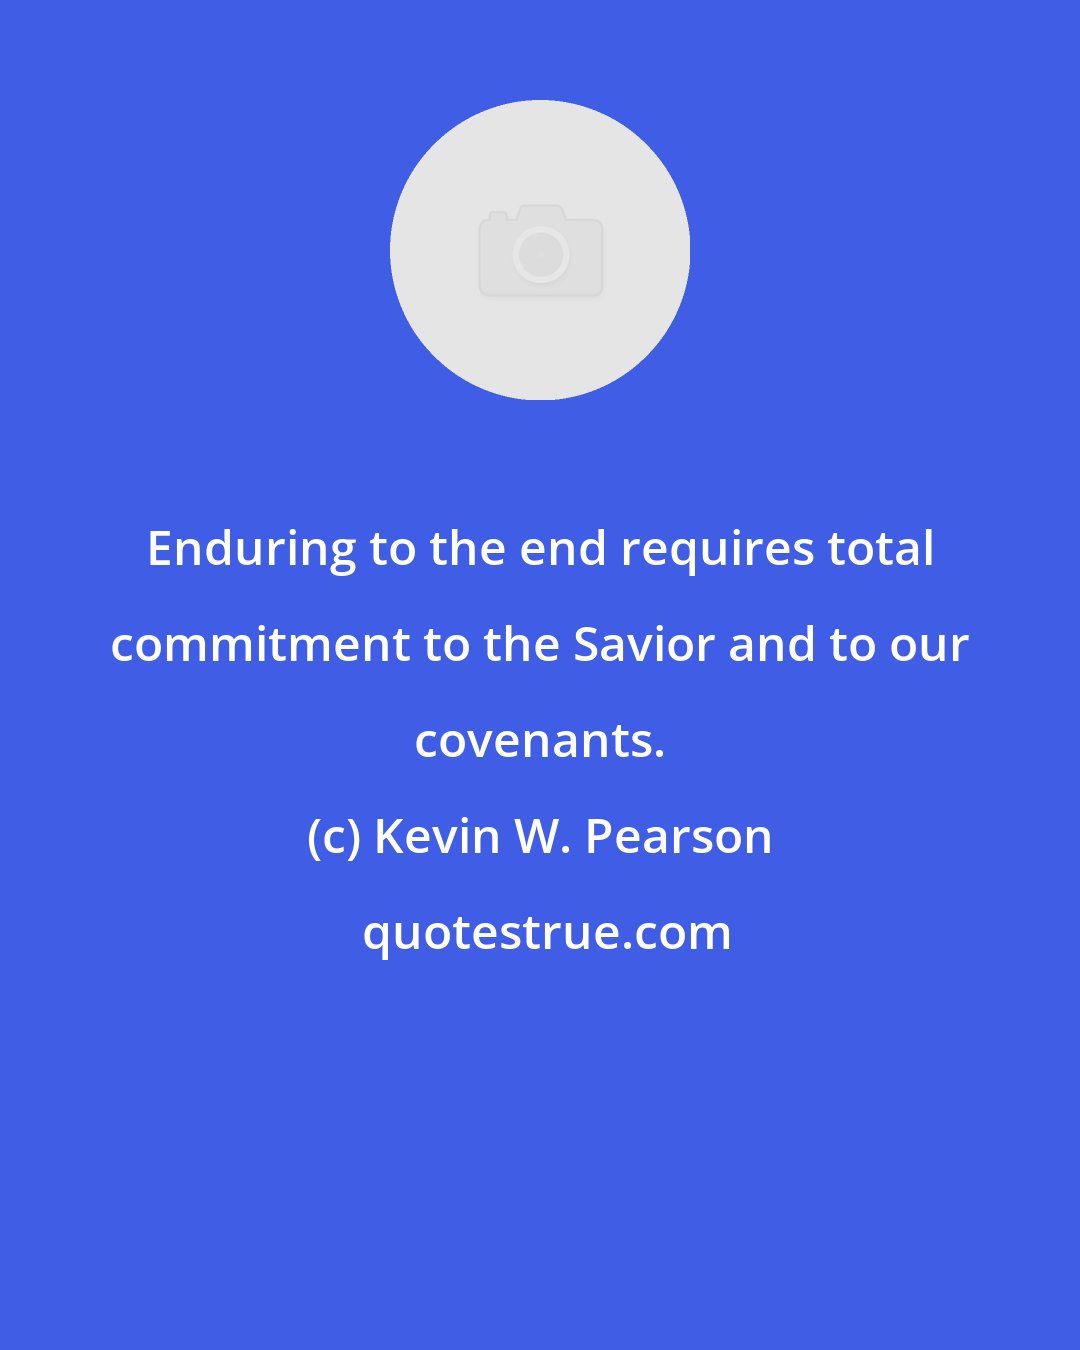 Kevin W. Pearson: Enduring to the end requires total commitment to the Savior and to our covenants.